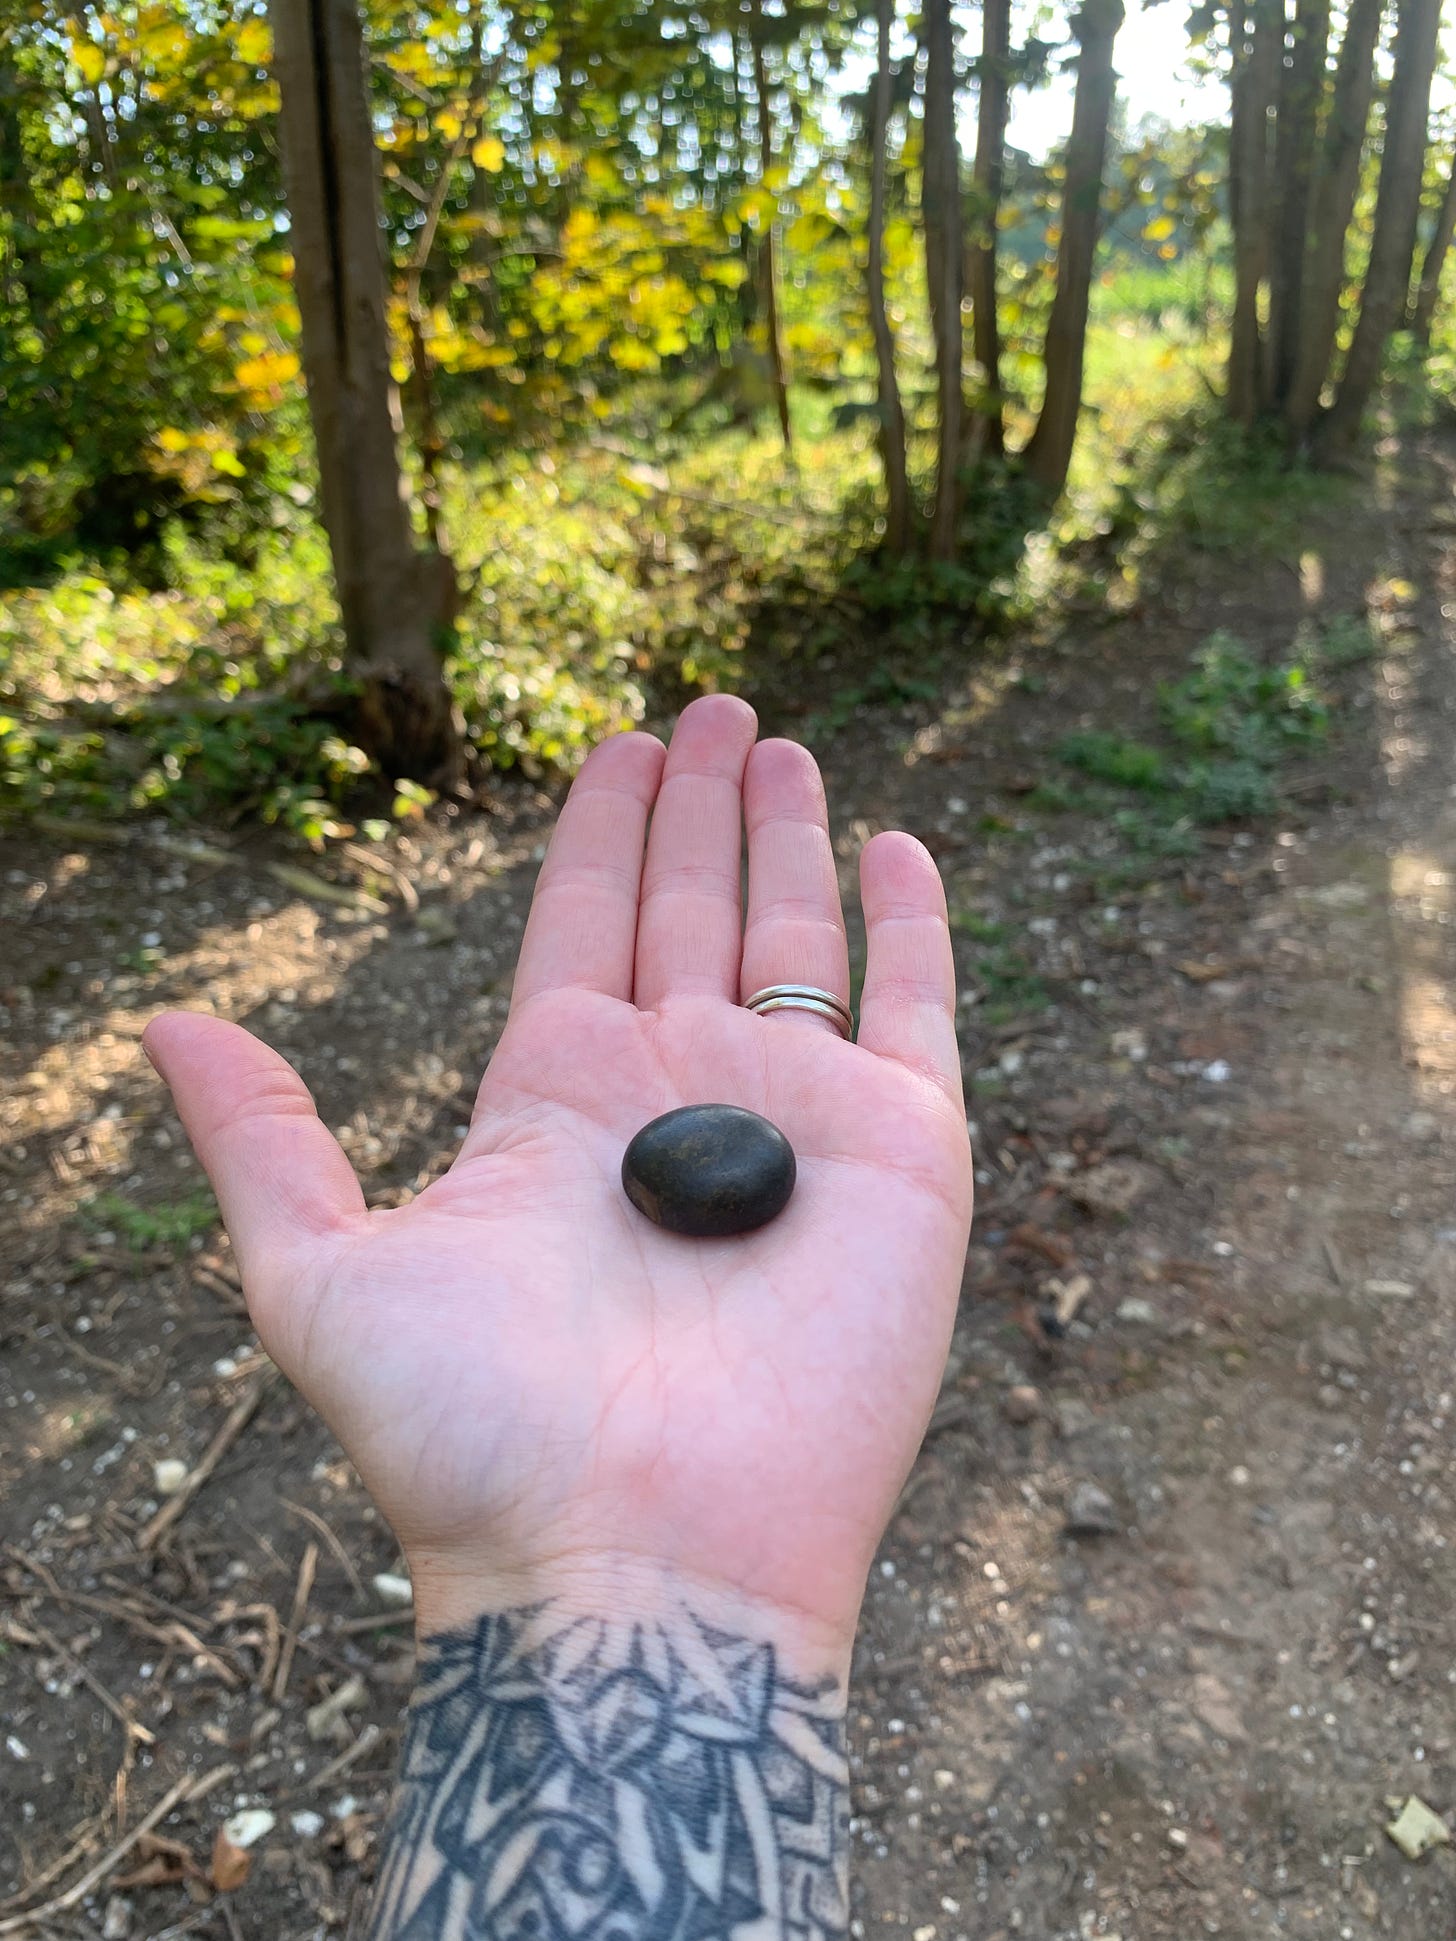 A photo of a hand holding a perfectly oval black rock in the woods